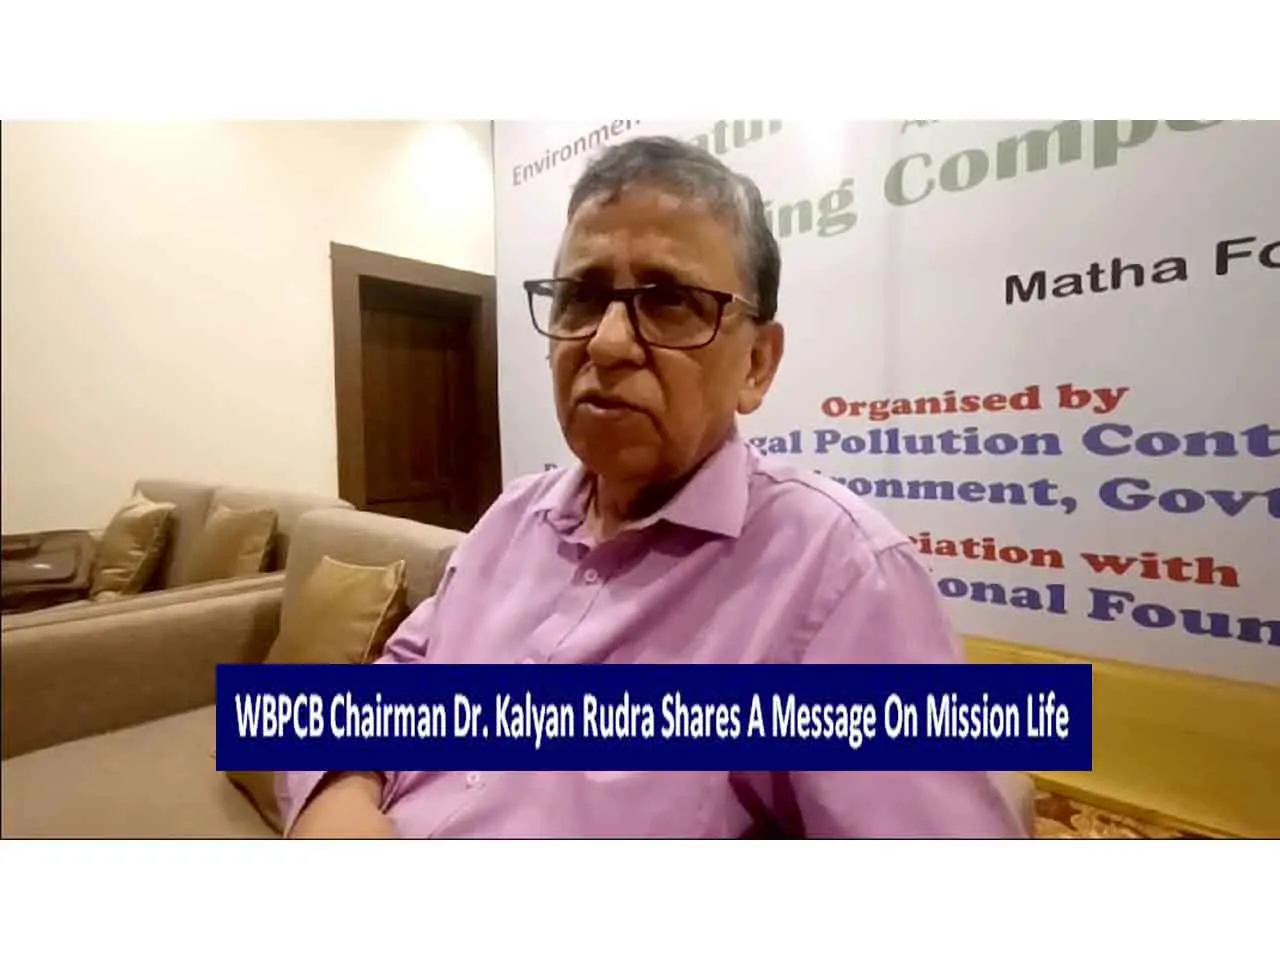 WBPCB Chairman Dr. Kalyan Rudra Shares A Message On Mission Life